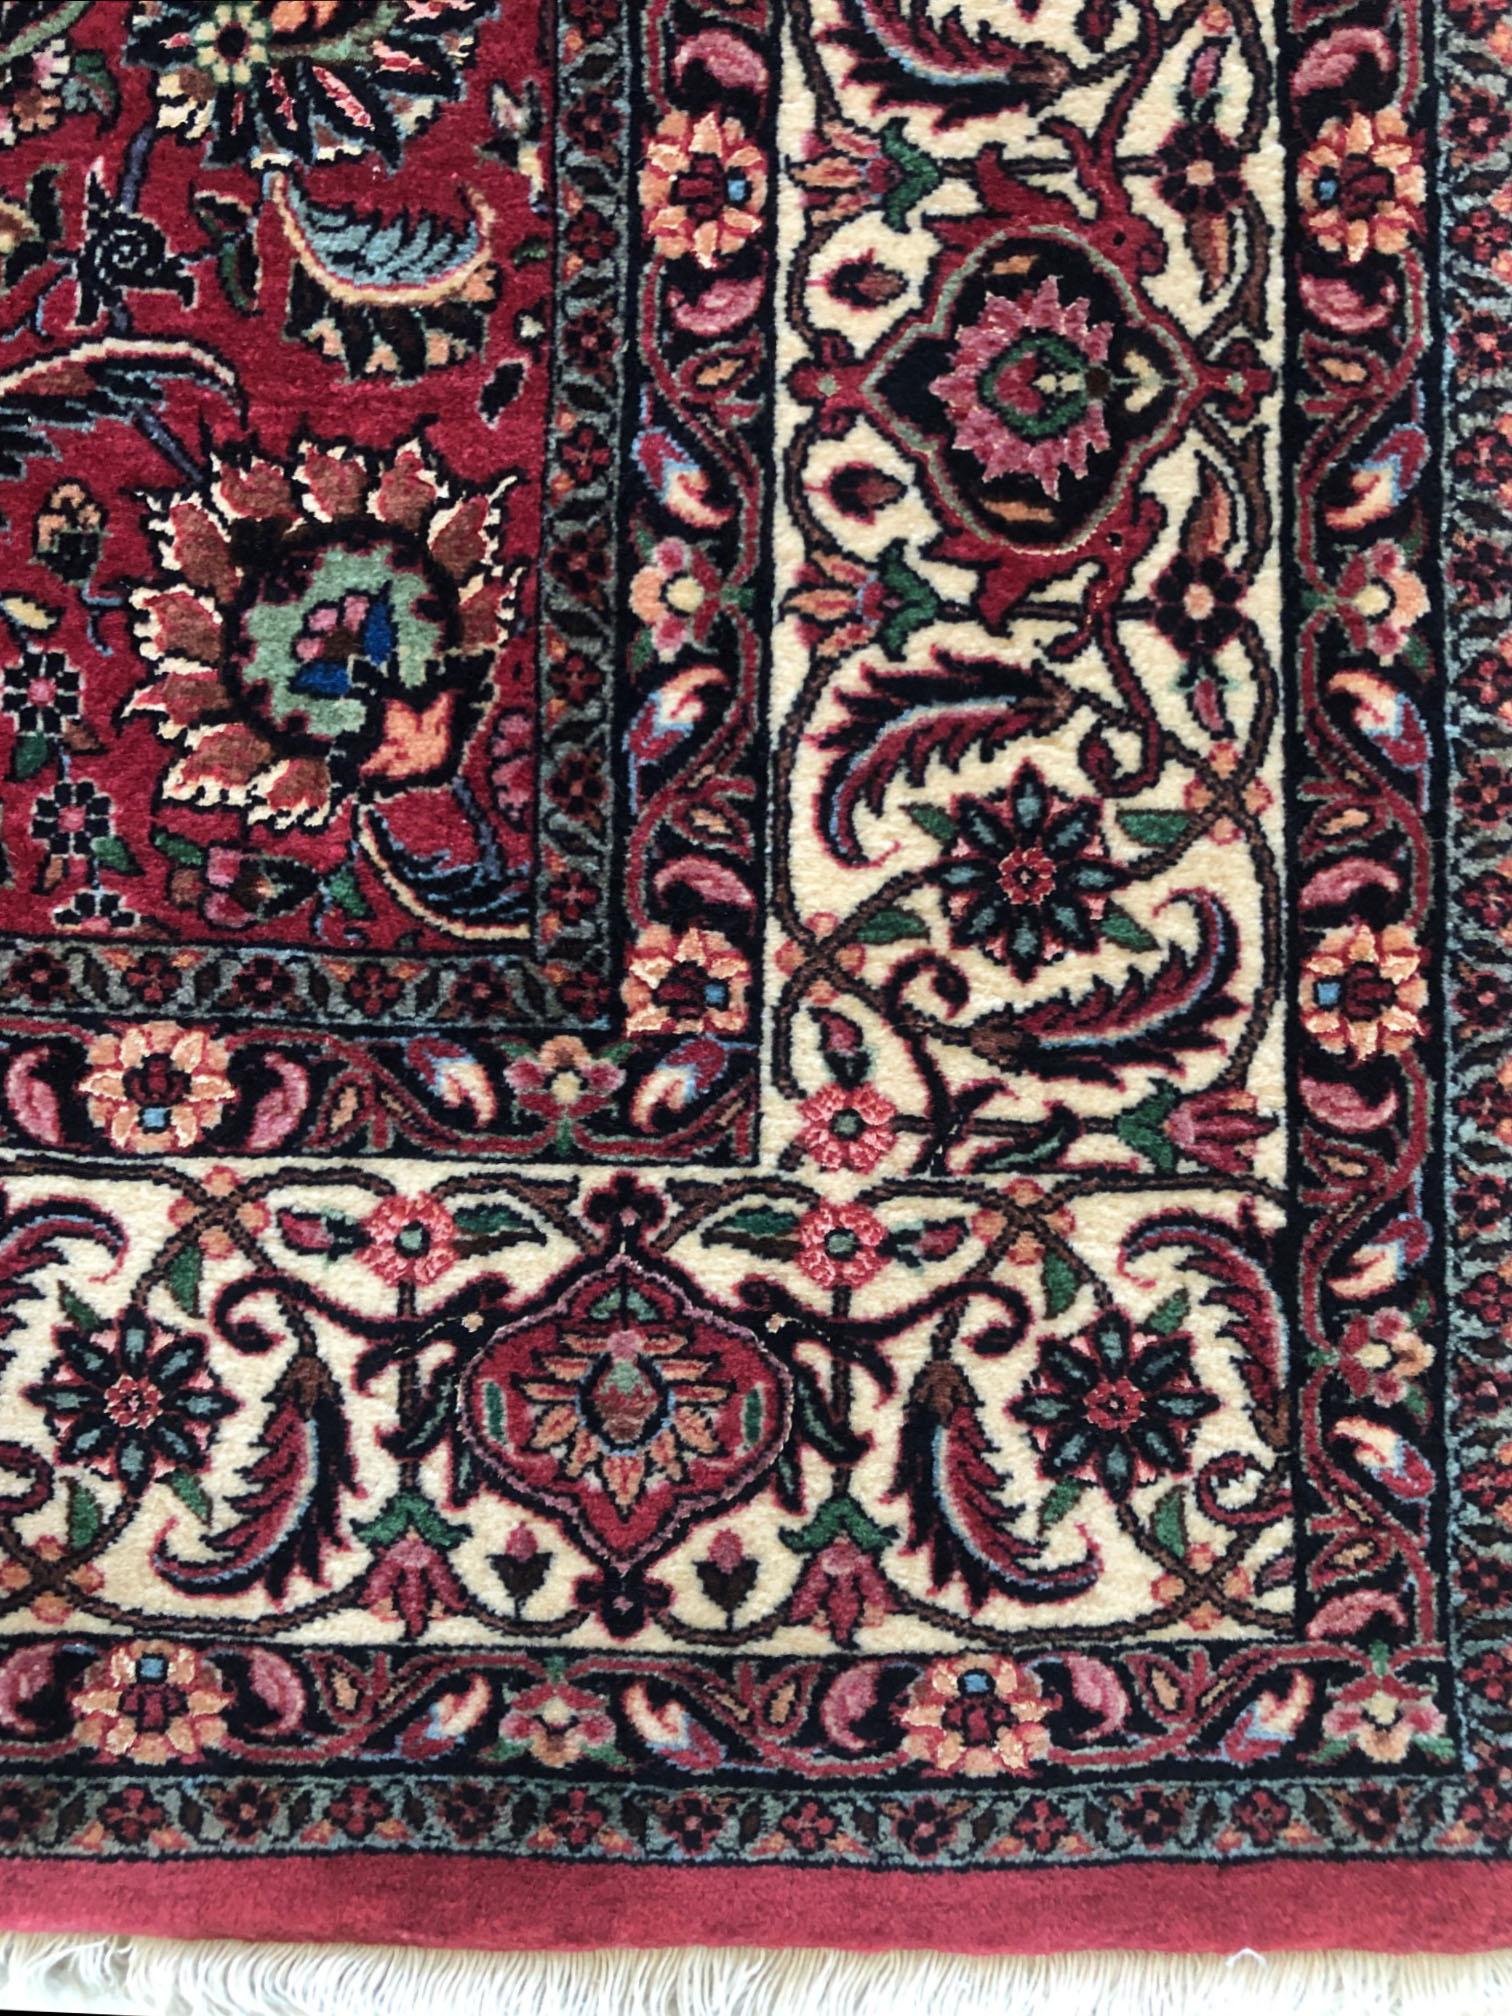 This piece is a handmade Persian Bijar (Tokun) rug. The pile is wool and silk with cotton foundation. The base color is red, with cream border. This rug has highly detailed floral design which is called Golfarang. Bijar rugs are well-known for their